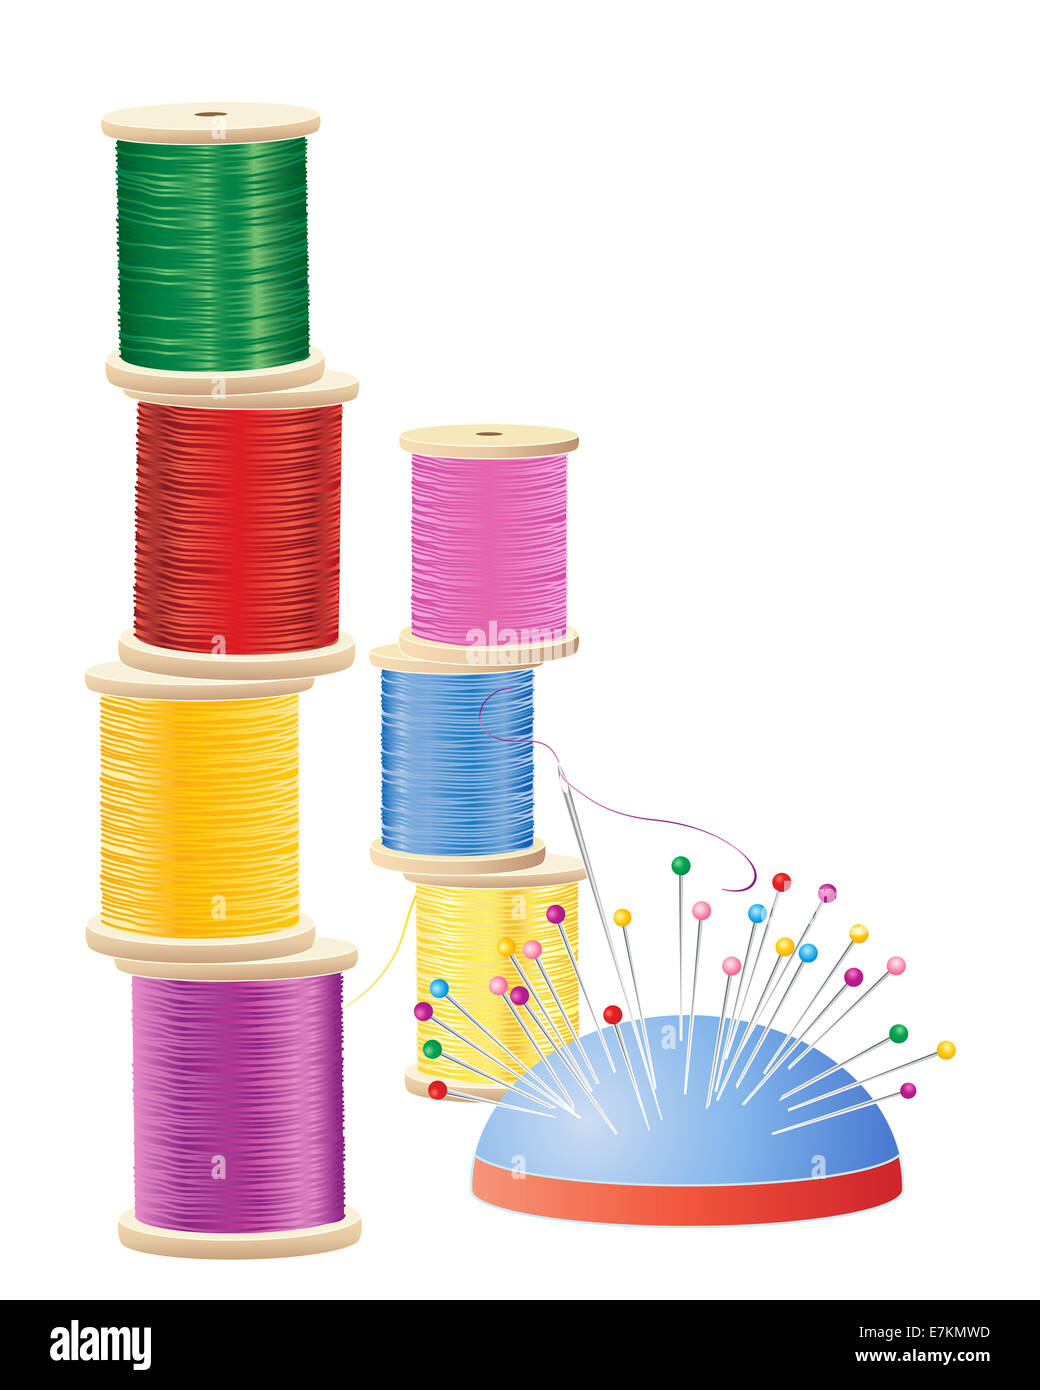 an illustration of a stack of colorful cotton reels with pin cushion and needle on a white background Stock Photo